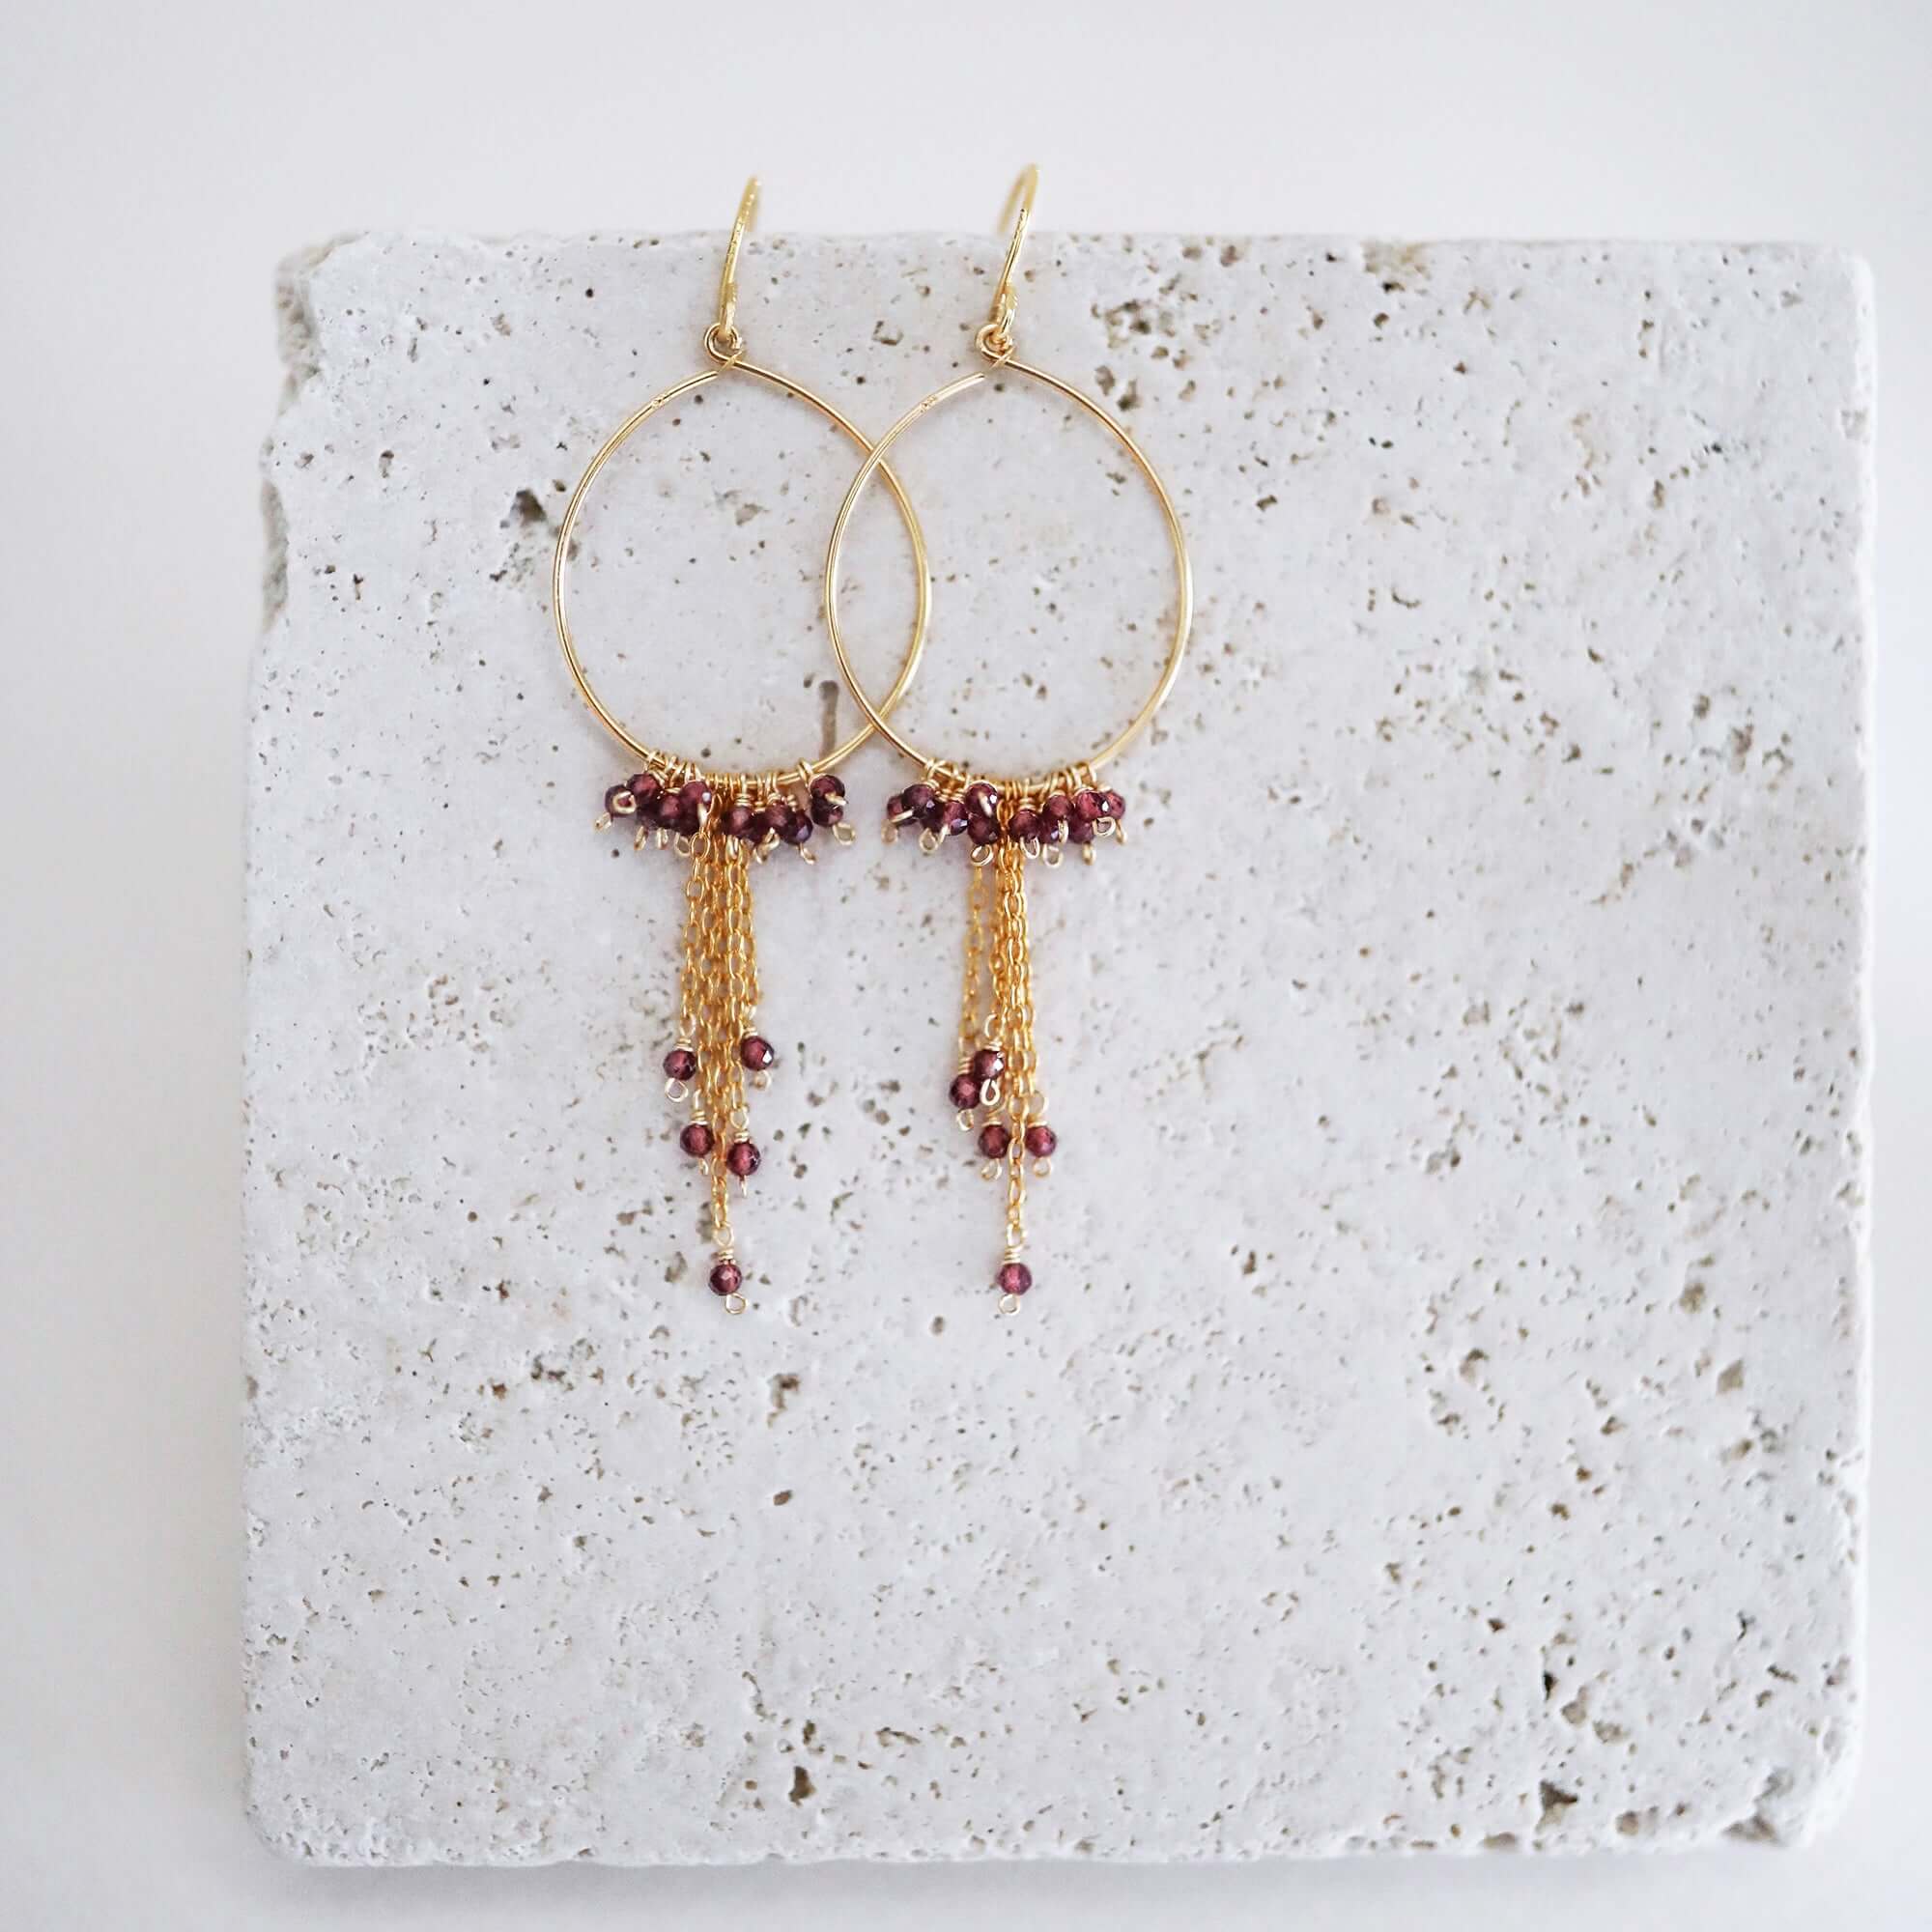 Gold Hoop Earrings with Delicate Chains and Garnet Stones